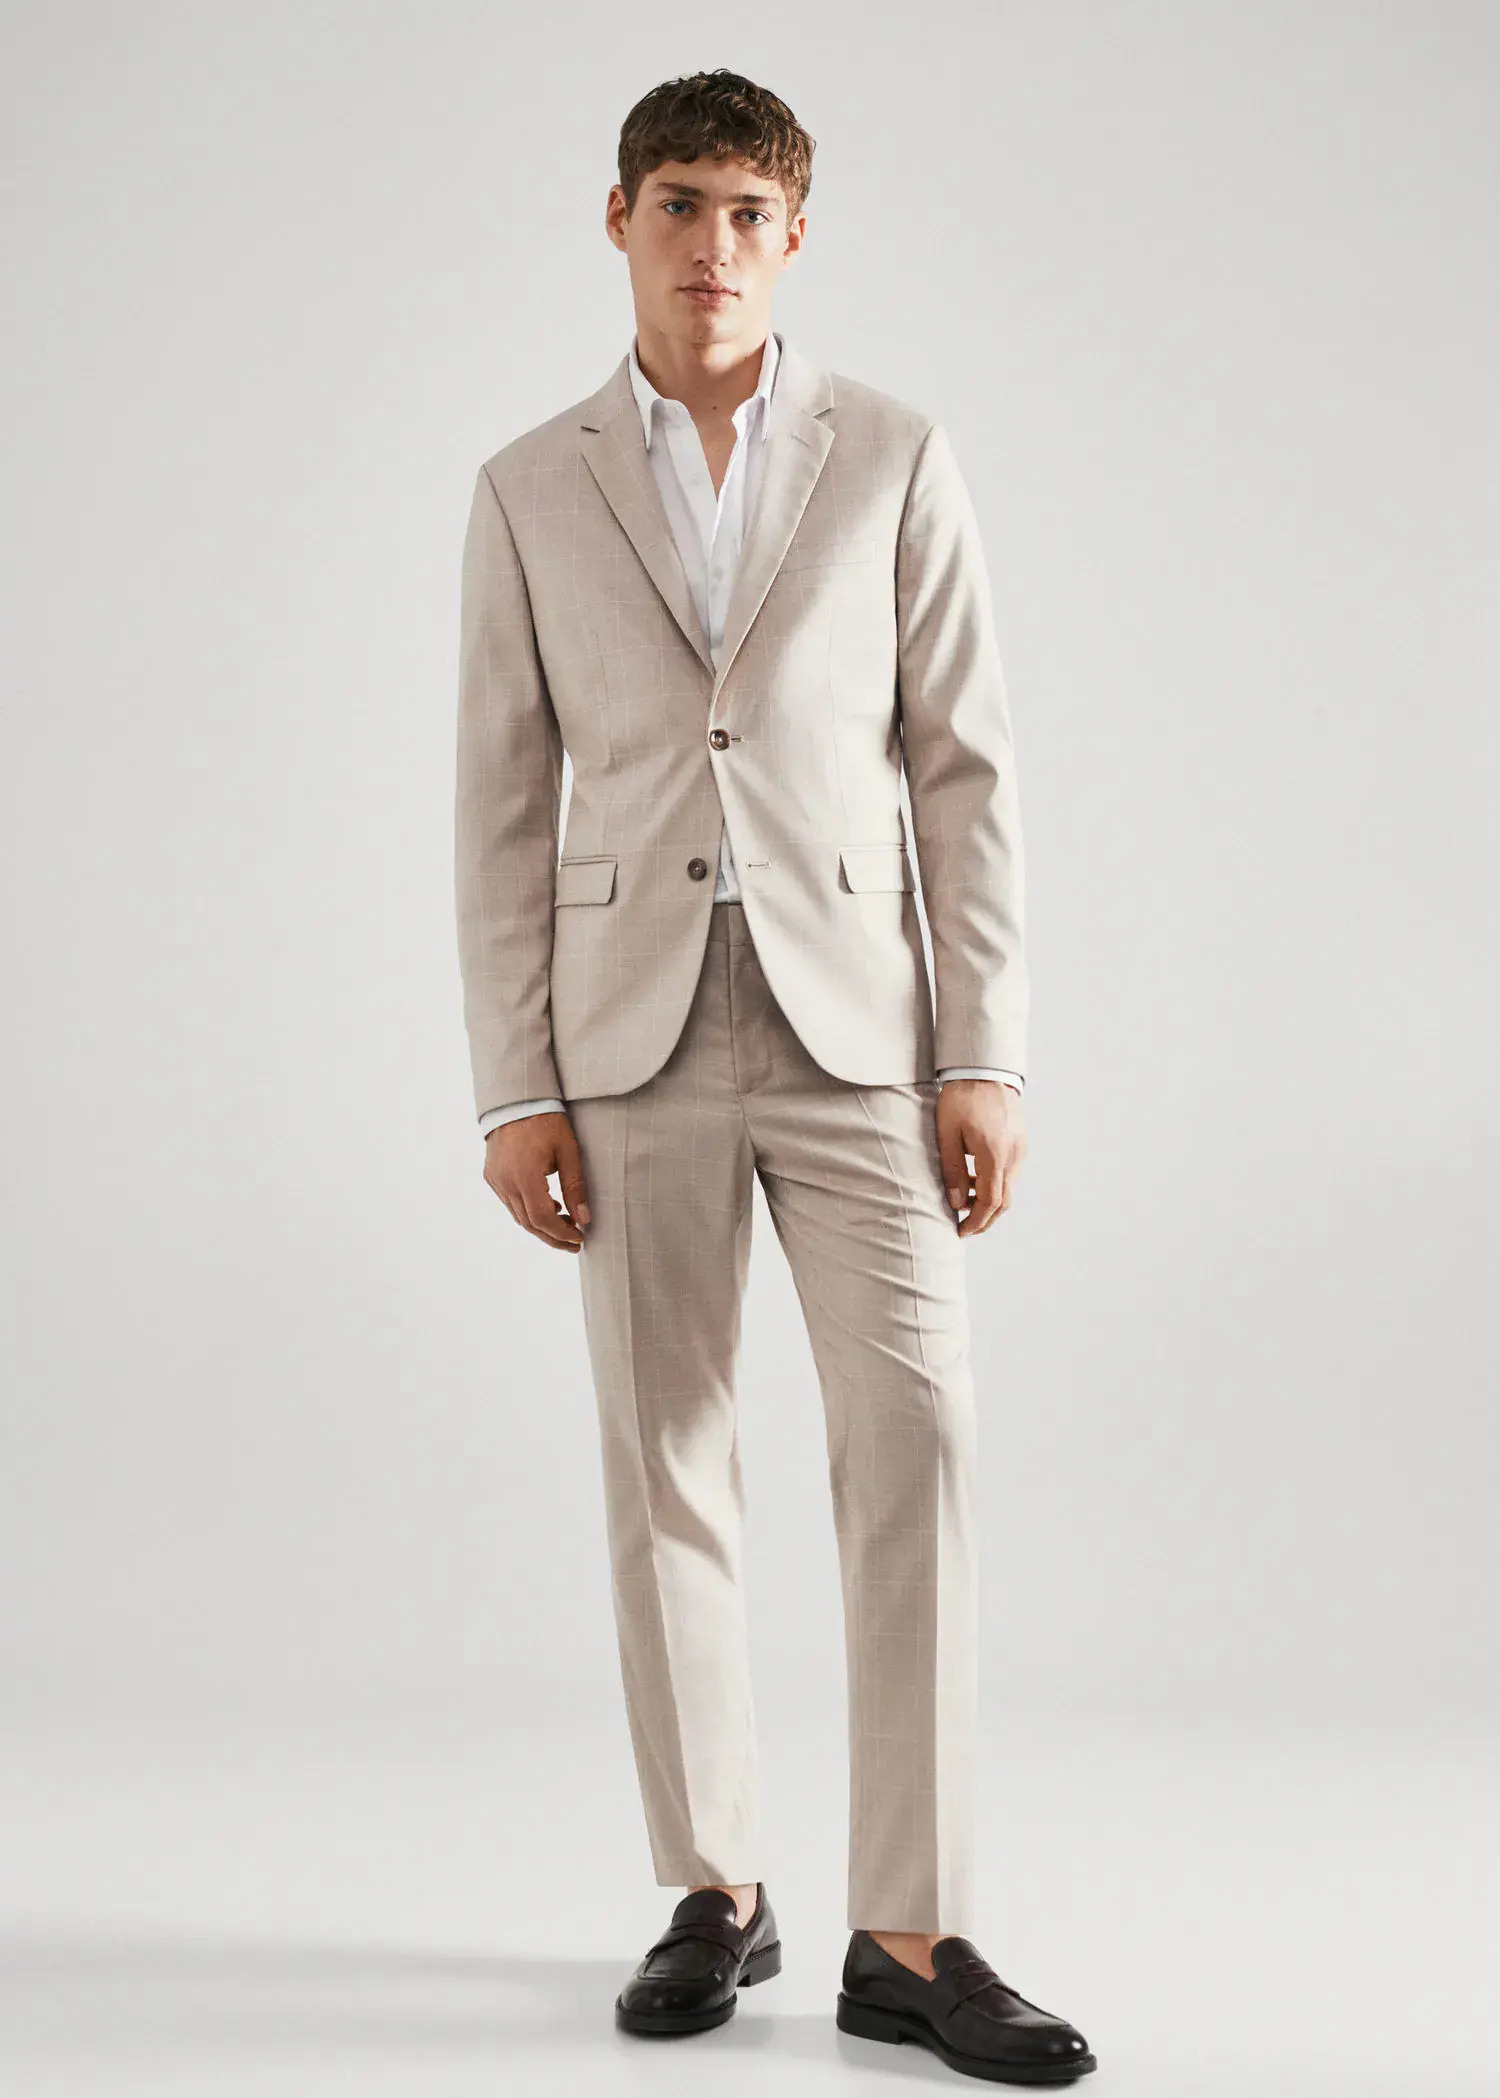 Mango Super slim-fit check suit jacket. a man in a suit standing in front of a white wall. 